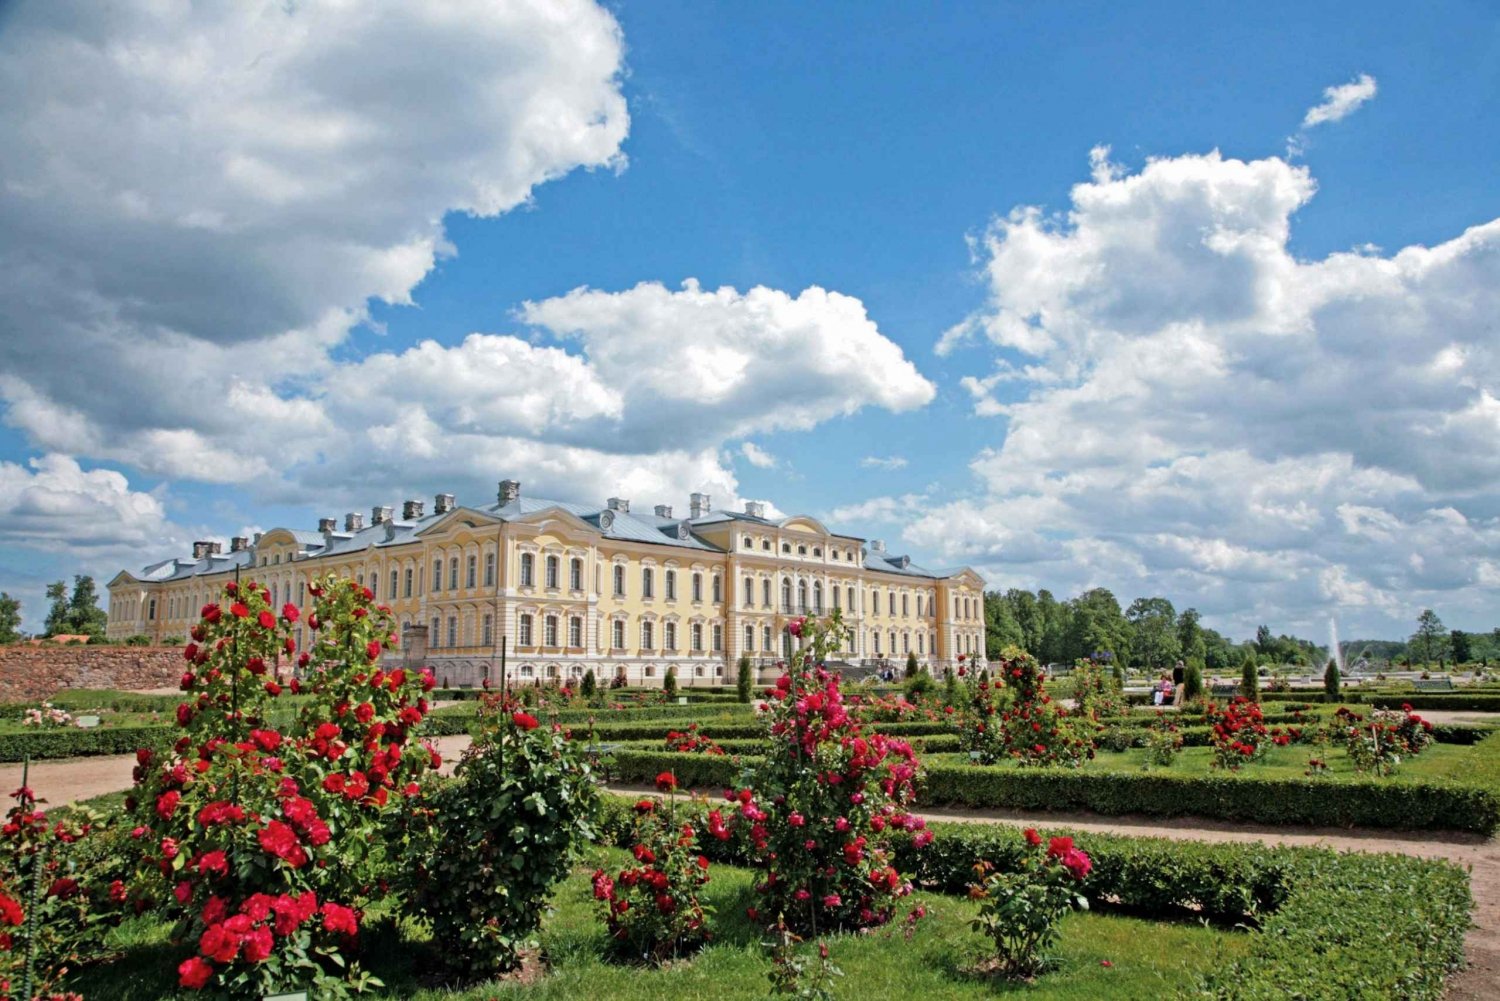 Discover-the-Magic-of-Rundale-Palace